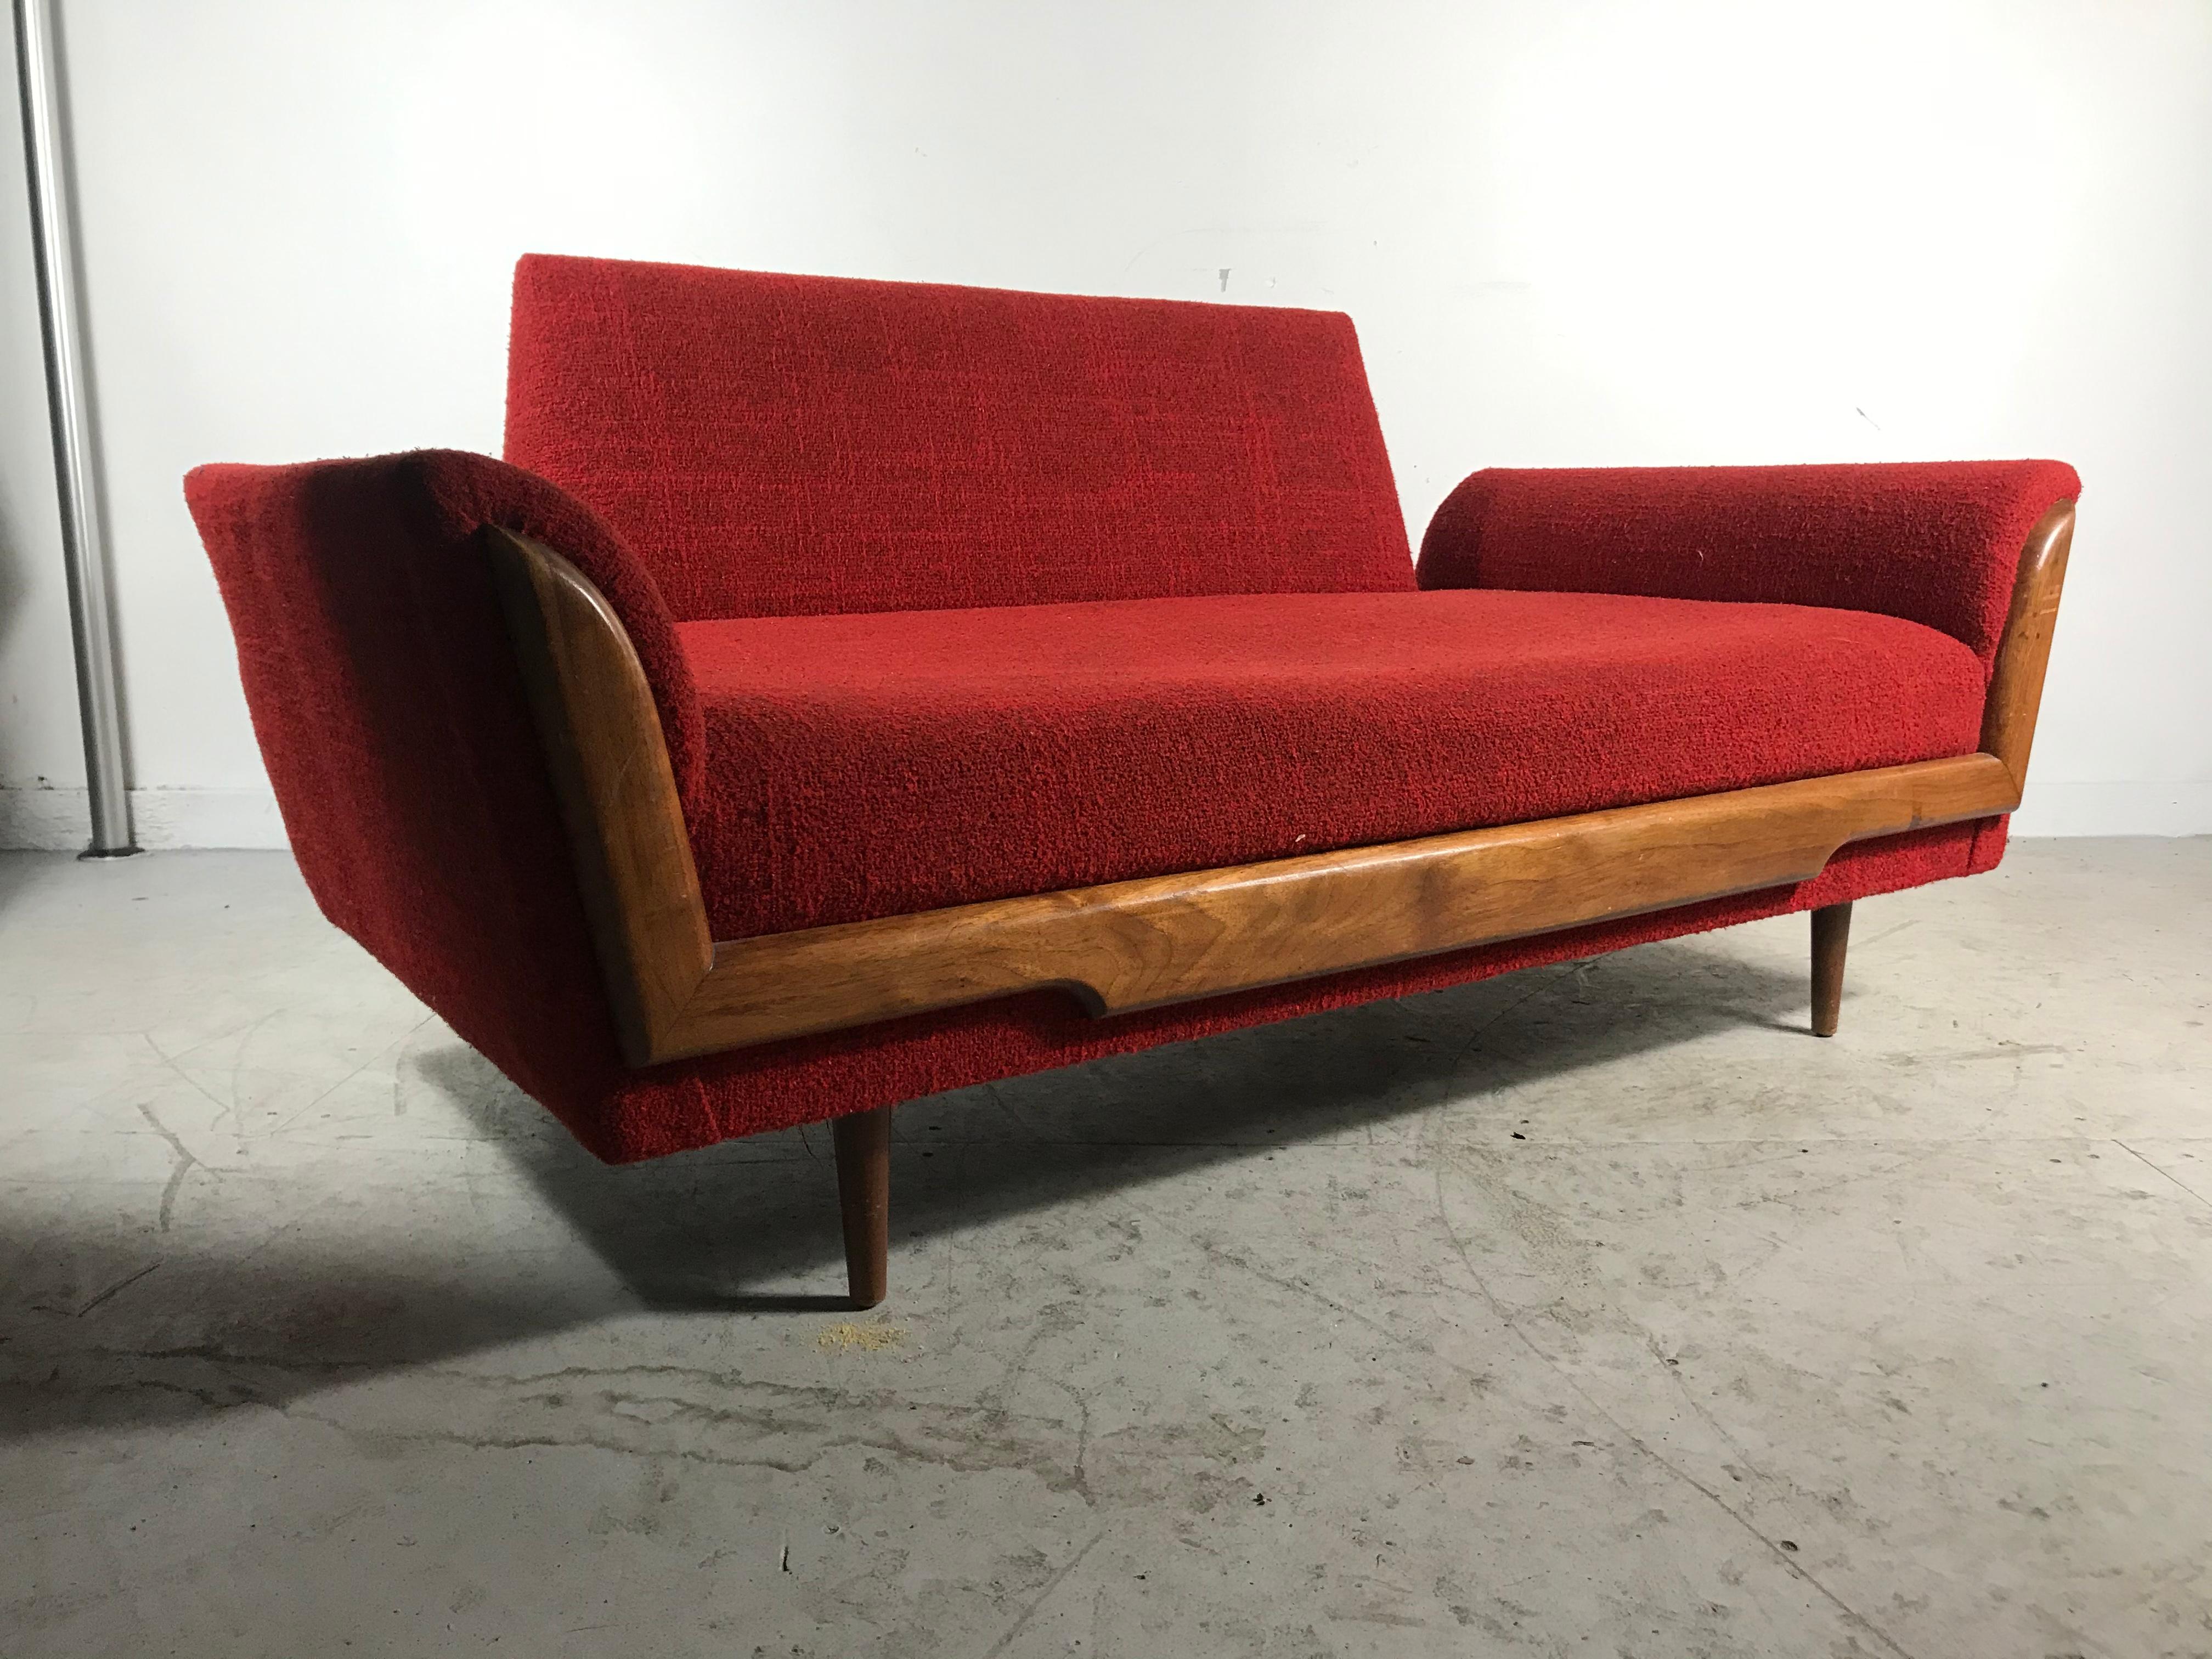 Mid-20th Century Classic Modernist 2-Seat Sofa, Sculpted Walnut Attributed to Adrian Pearsall